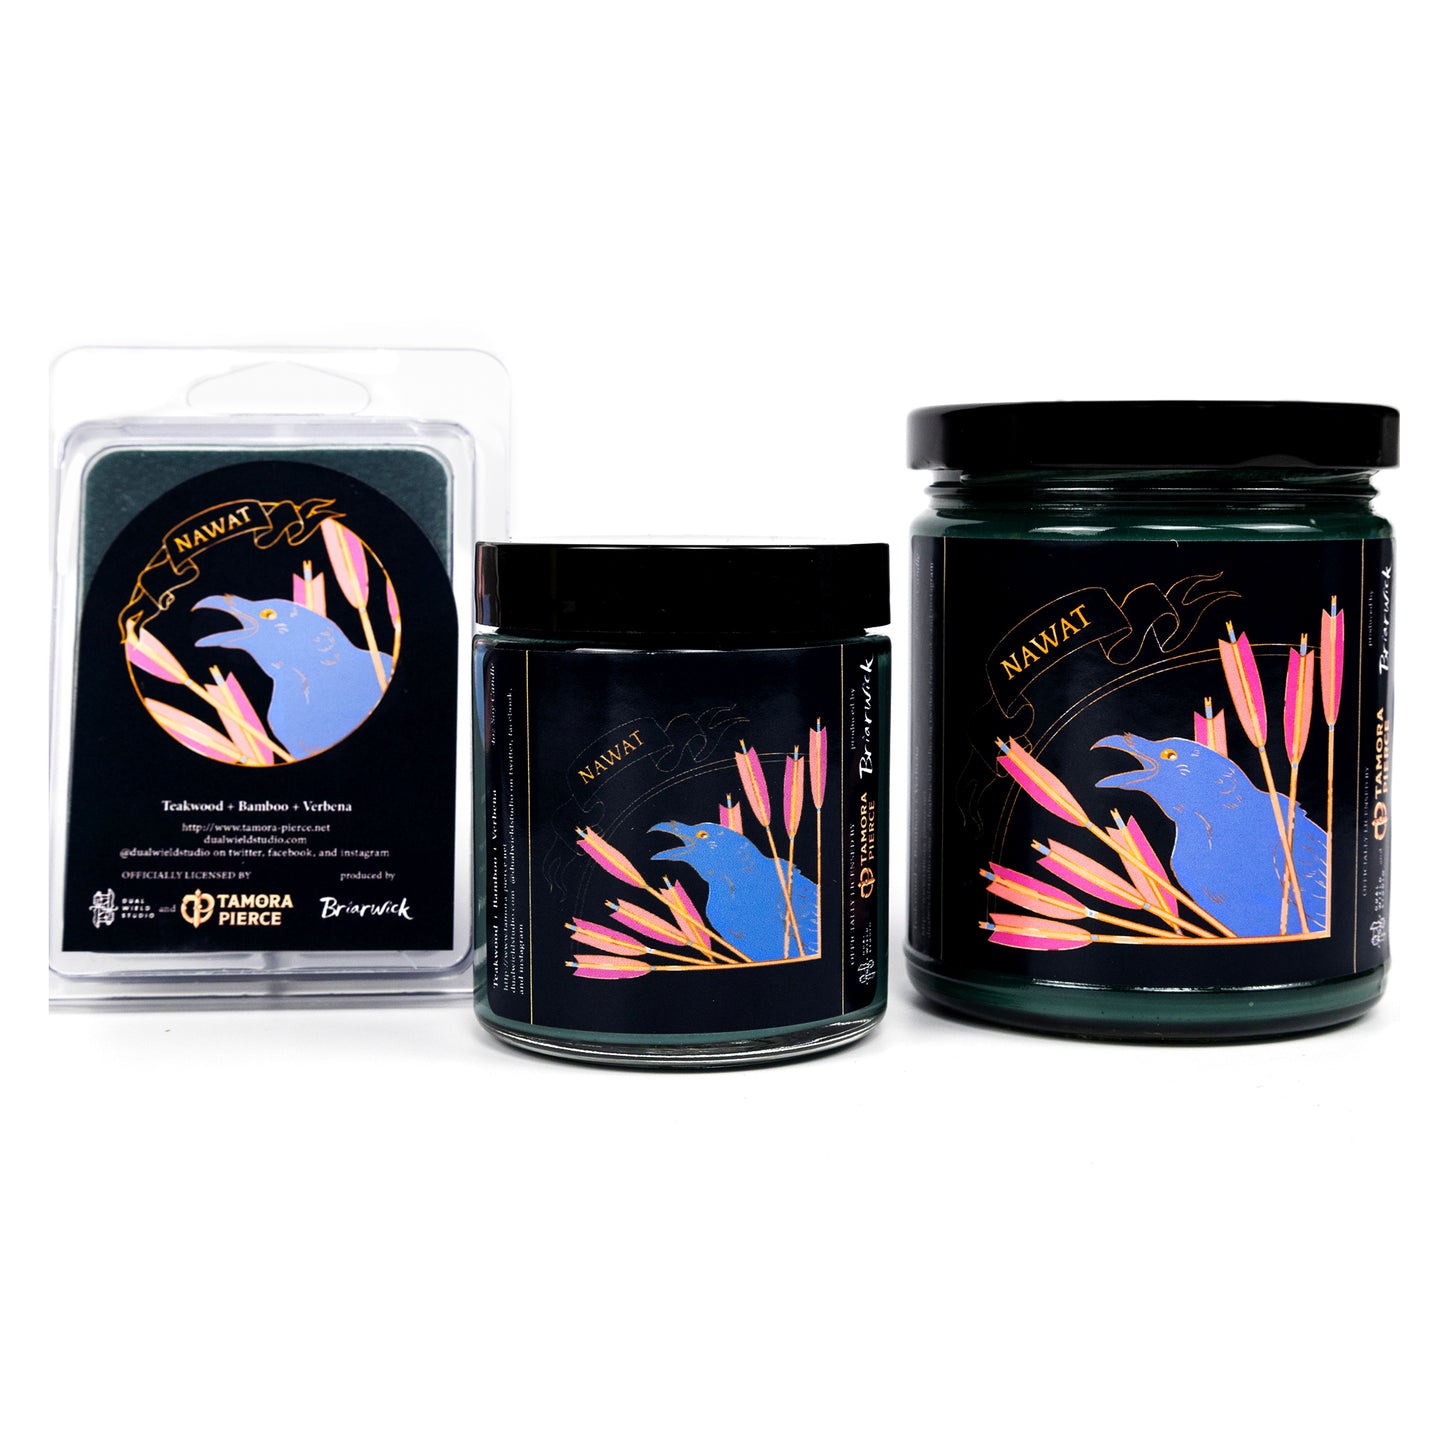 Full set of both Nawat candles and wax melts, all with forest green wax. The label illustration depicts a cawing crow surrounded by bundles of orange and pink fletched arrows.